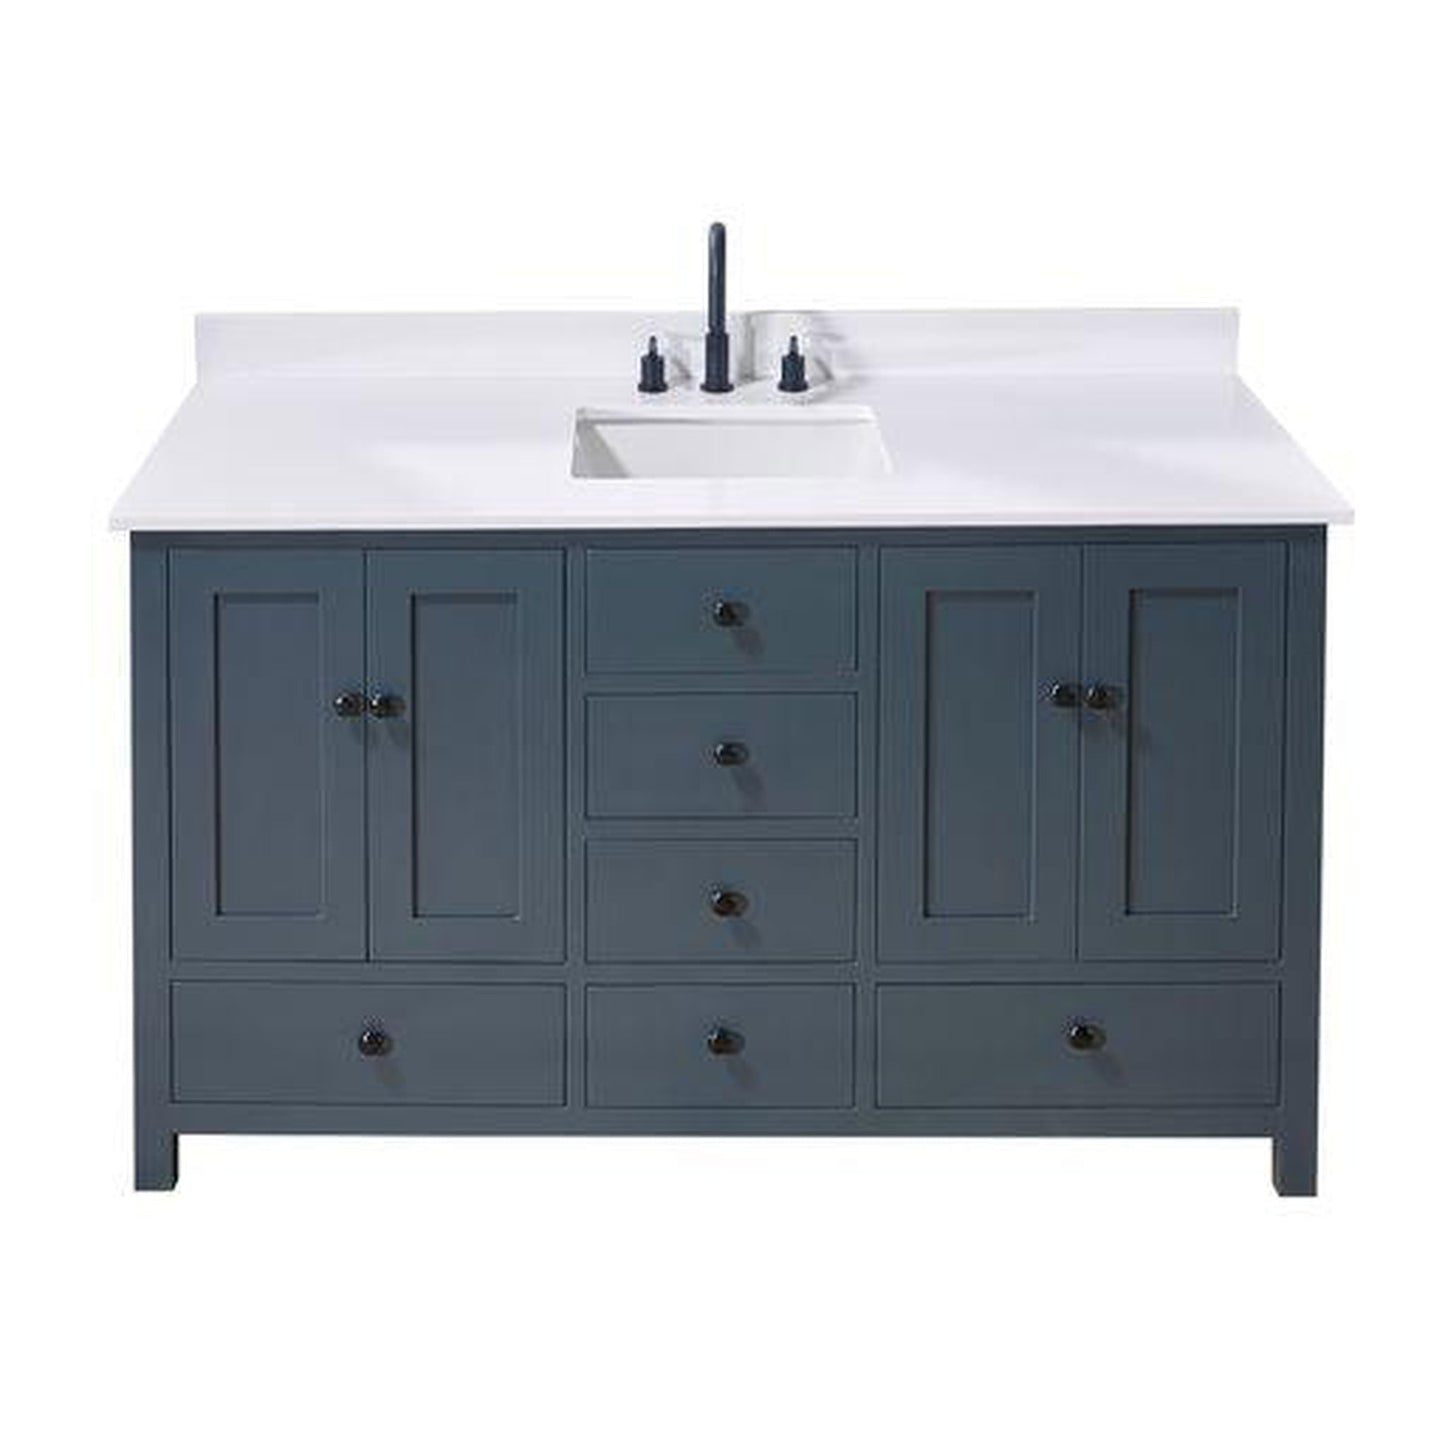 Altair Andalo 61" x 22" Snow White Composite Stone Bathroom Vanity Top With Single White SInk